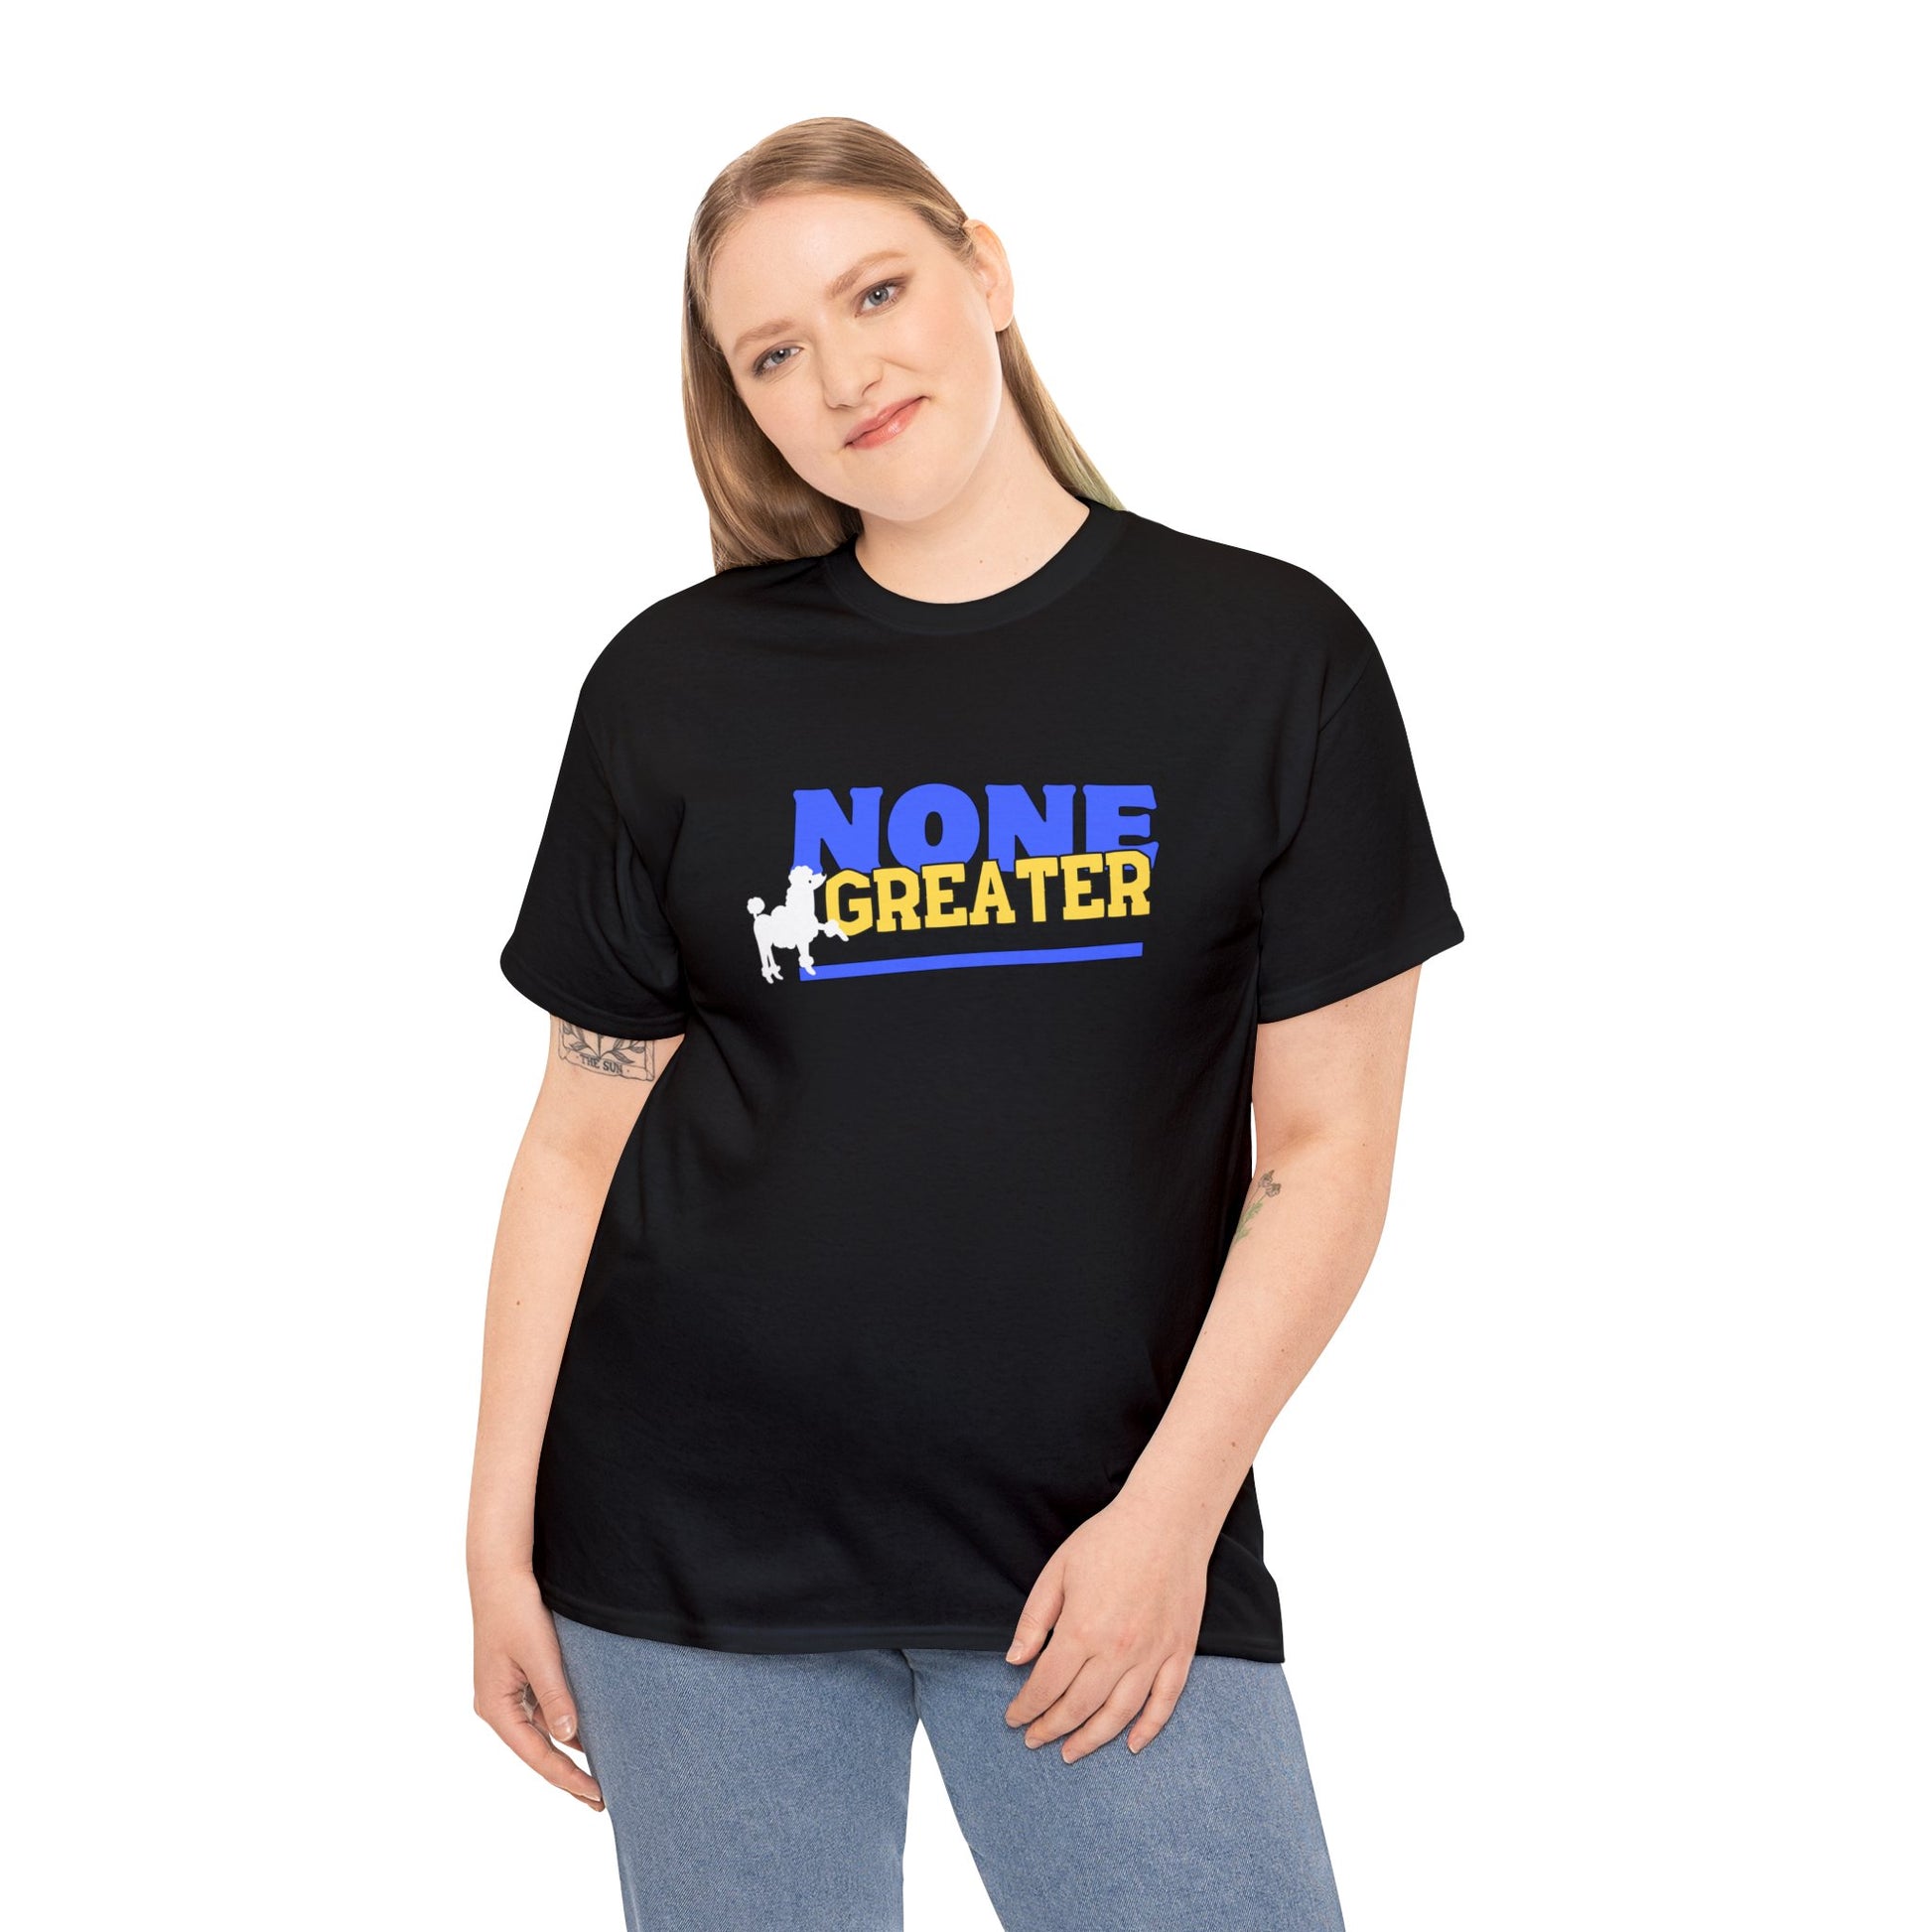 Black Unisex Heavy Cotton Tee saying "None Greater" in Royal Blue and Gold w/a white dog